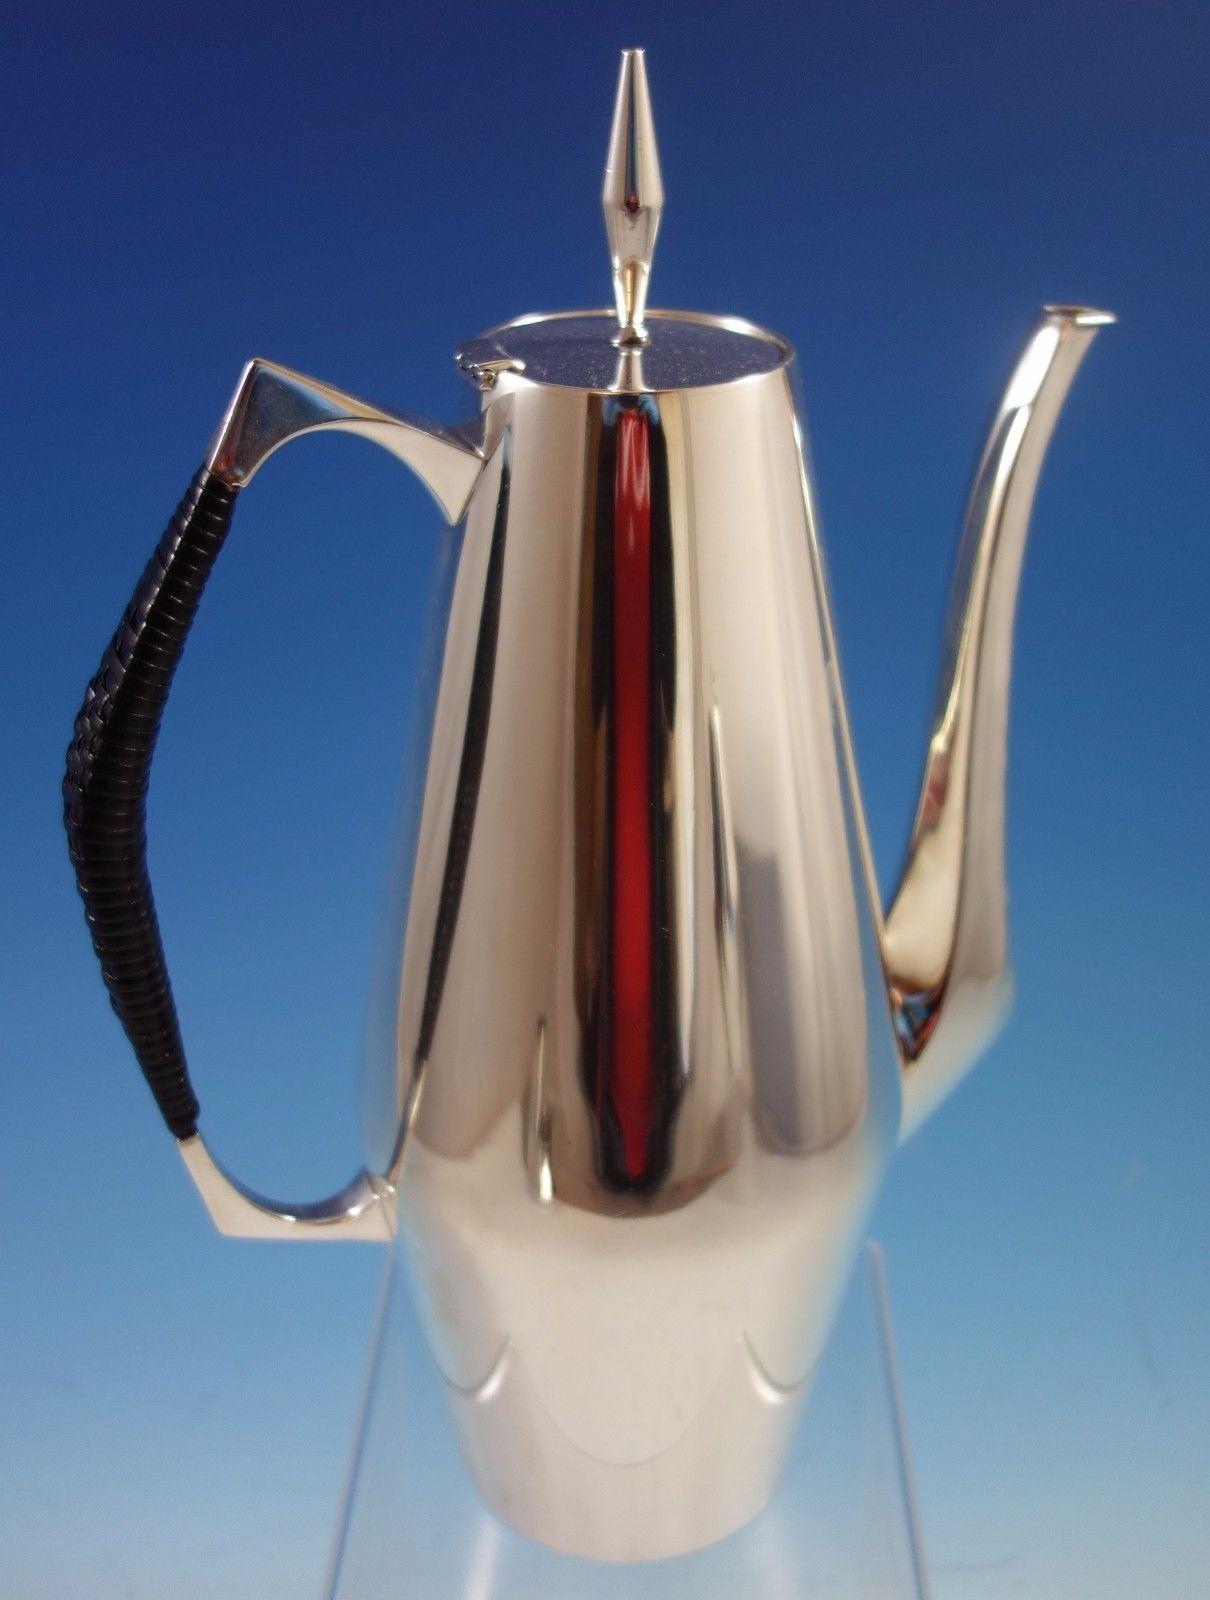 Diamond by Reed & Barton

Diamond by Reed & Barton Mid-Century Modern sterling silver four-piece tea set with black wrapped handles #440. This set includes:

One coffee pot: Weighing 29.4 troy ounces and measuring 11 1/2